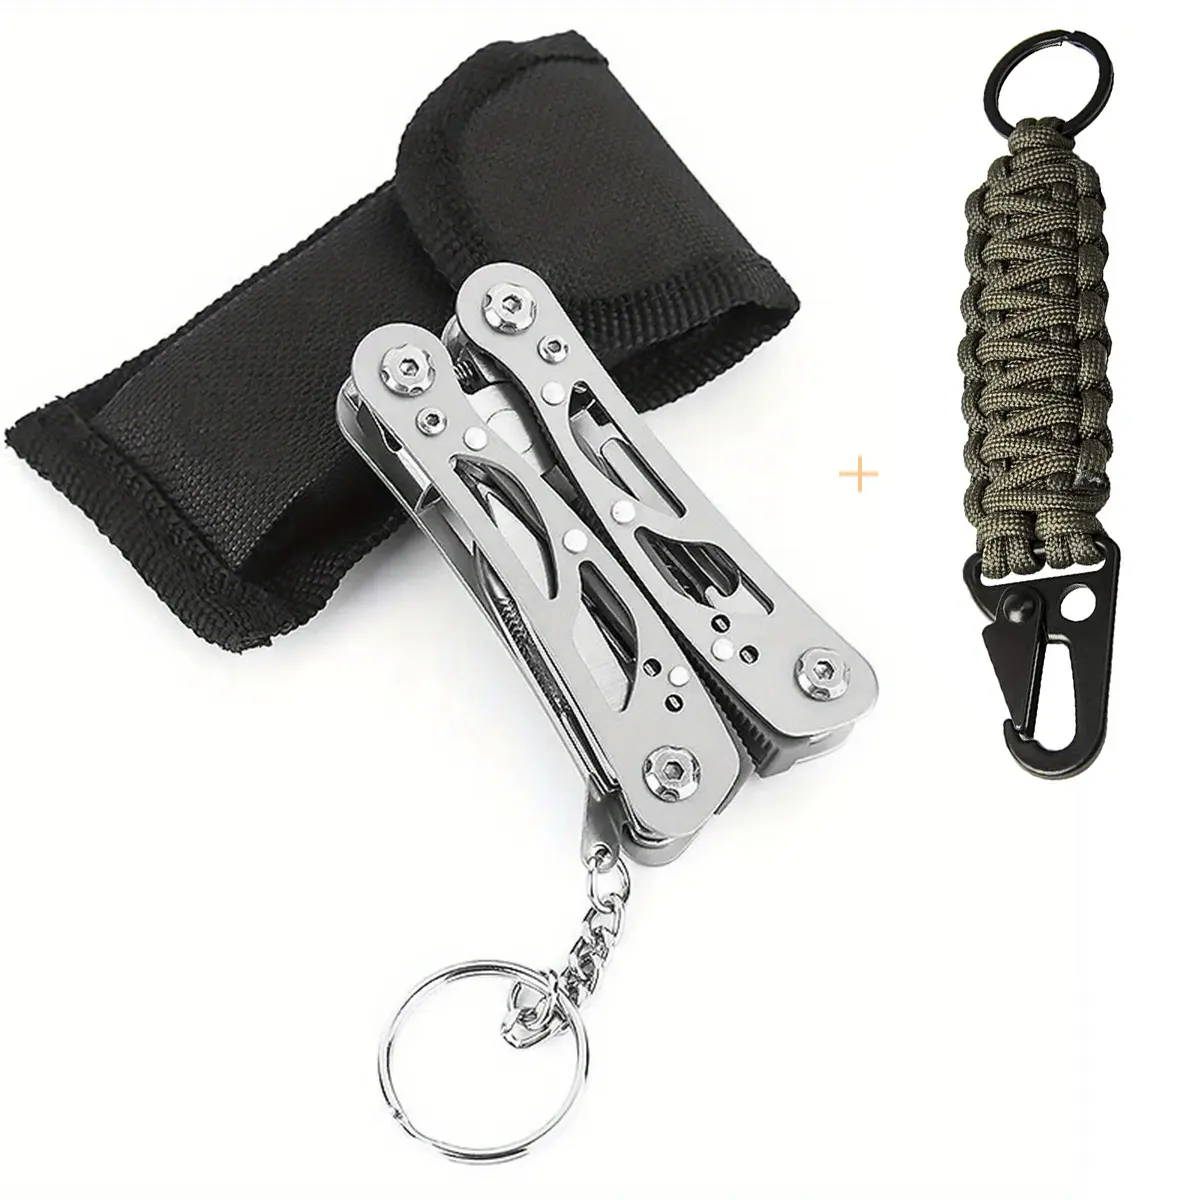 Outdoor Keychain Ring Camping Carabiner Paracord Cord Rope Camping Hiking Survival Kit Emergency Knot Bottle Opener Tools